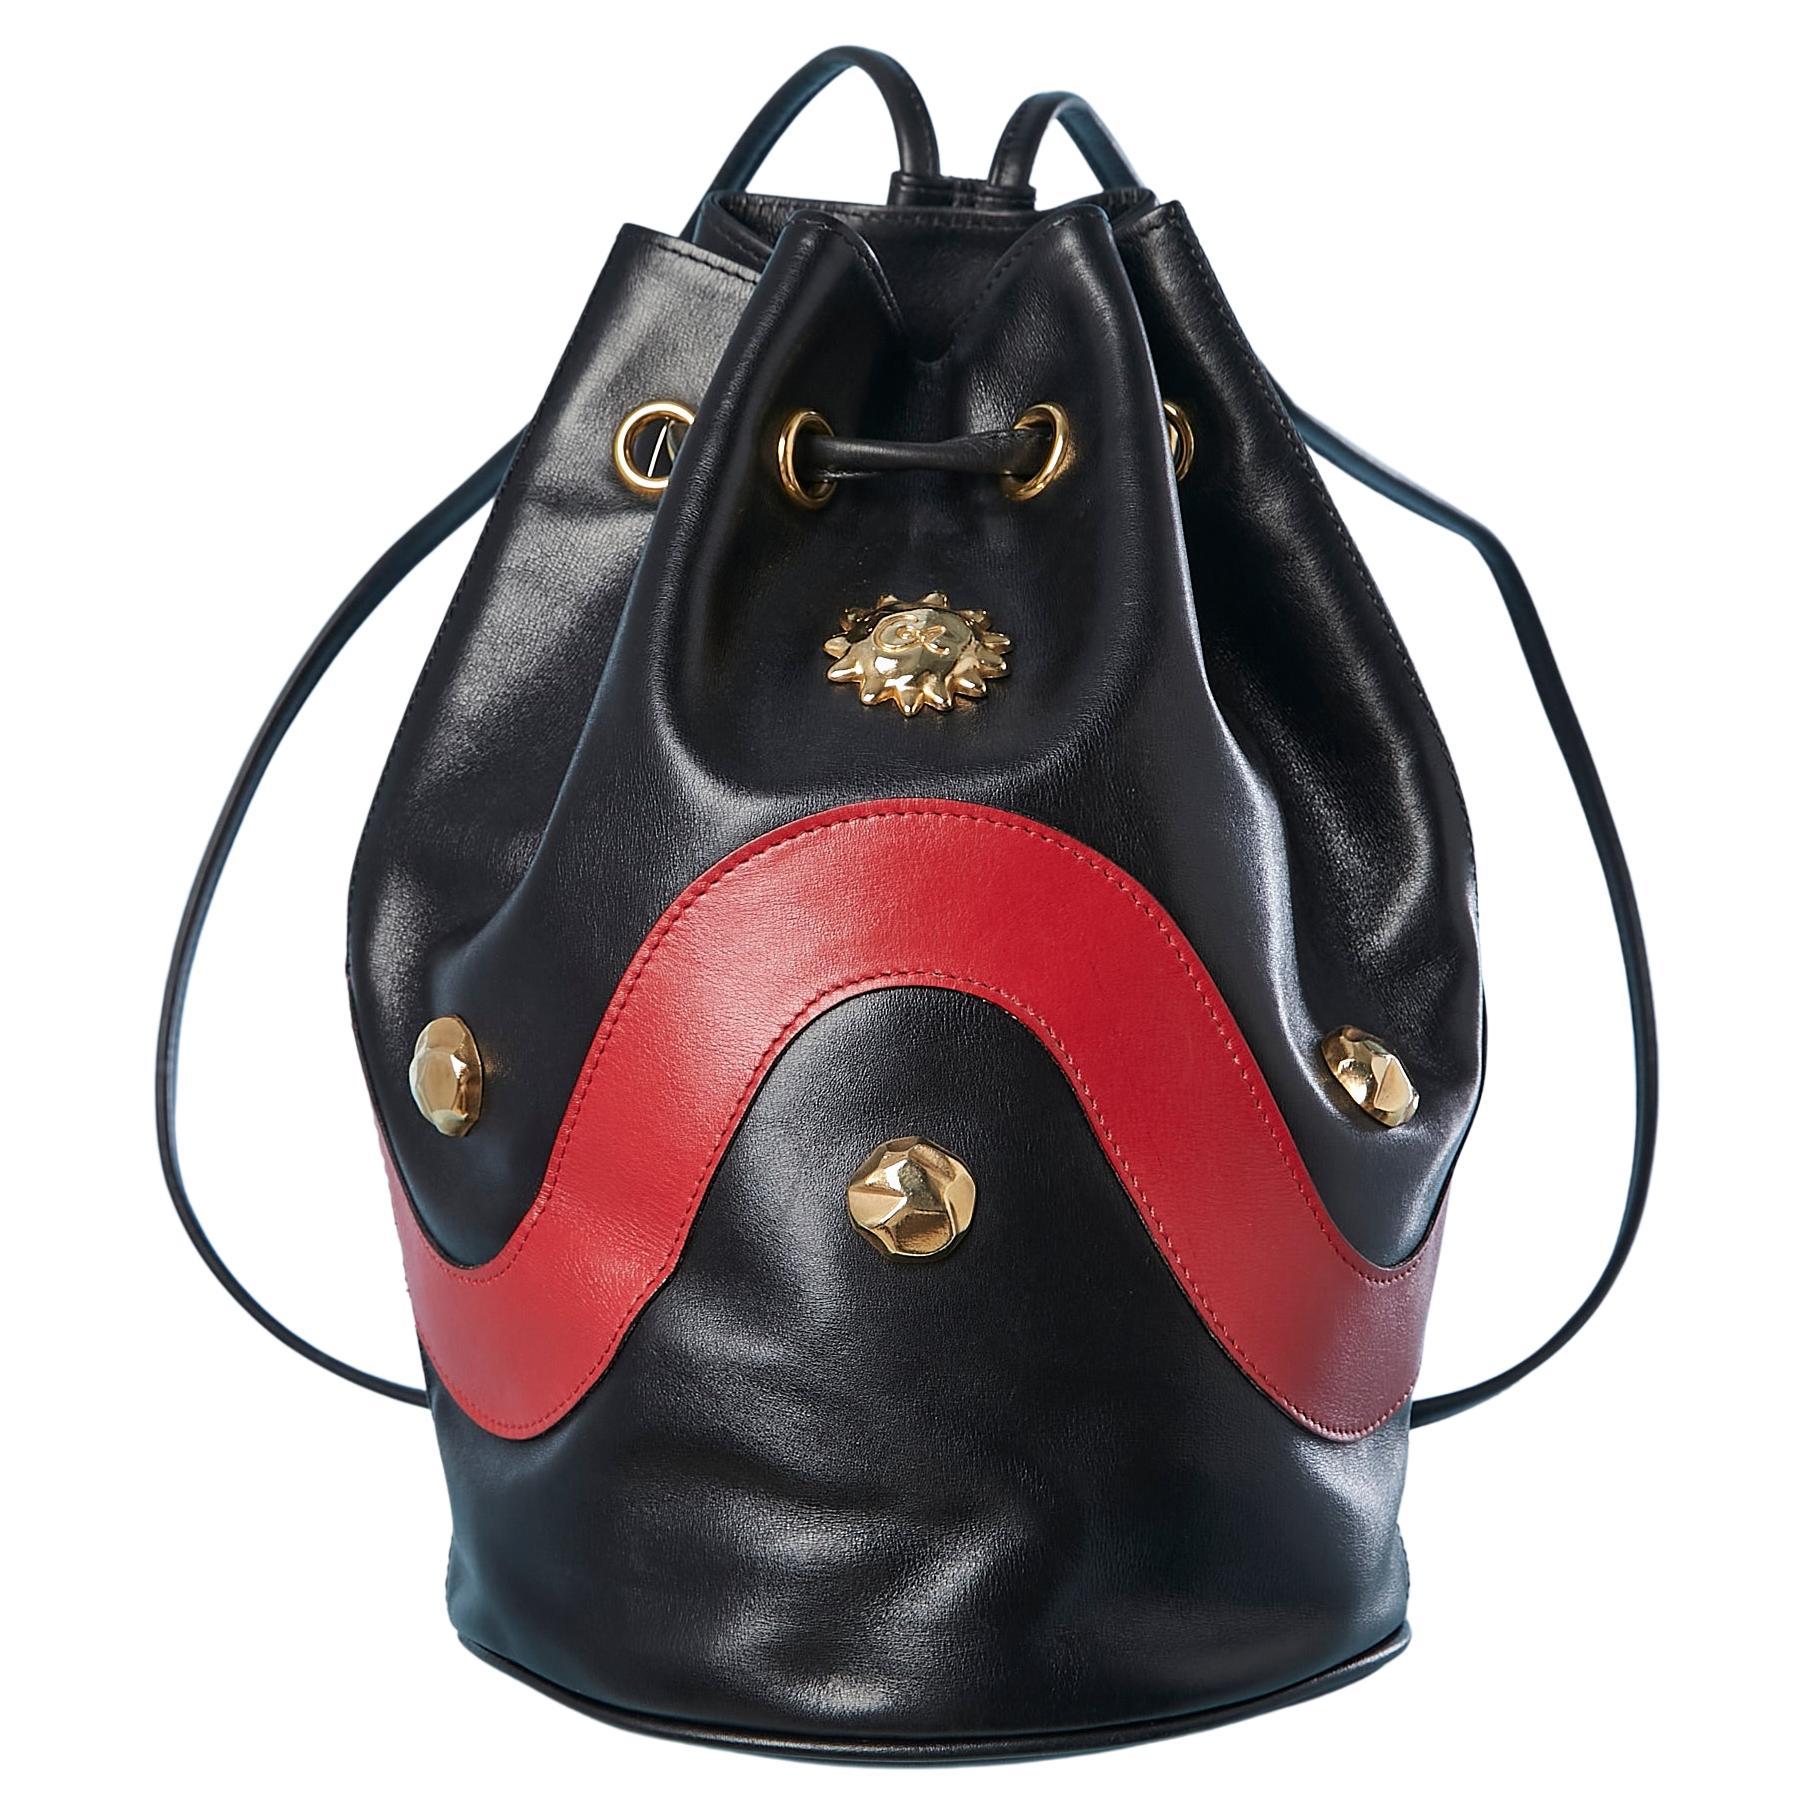 Purse bag in red and black leather with gold metal cabochon Christian Lacroix